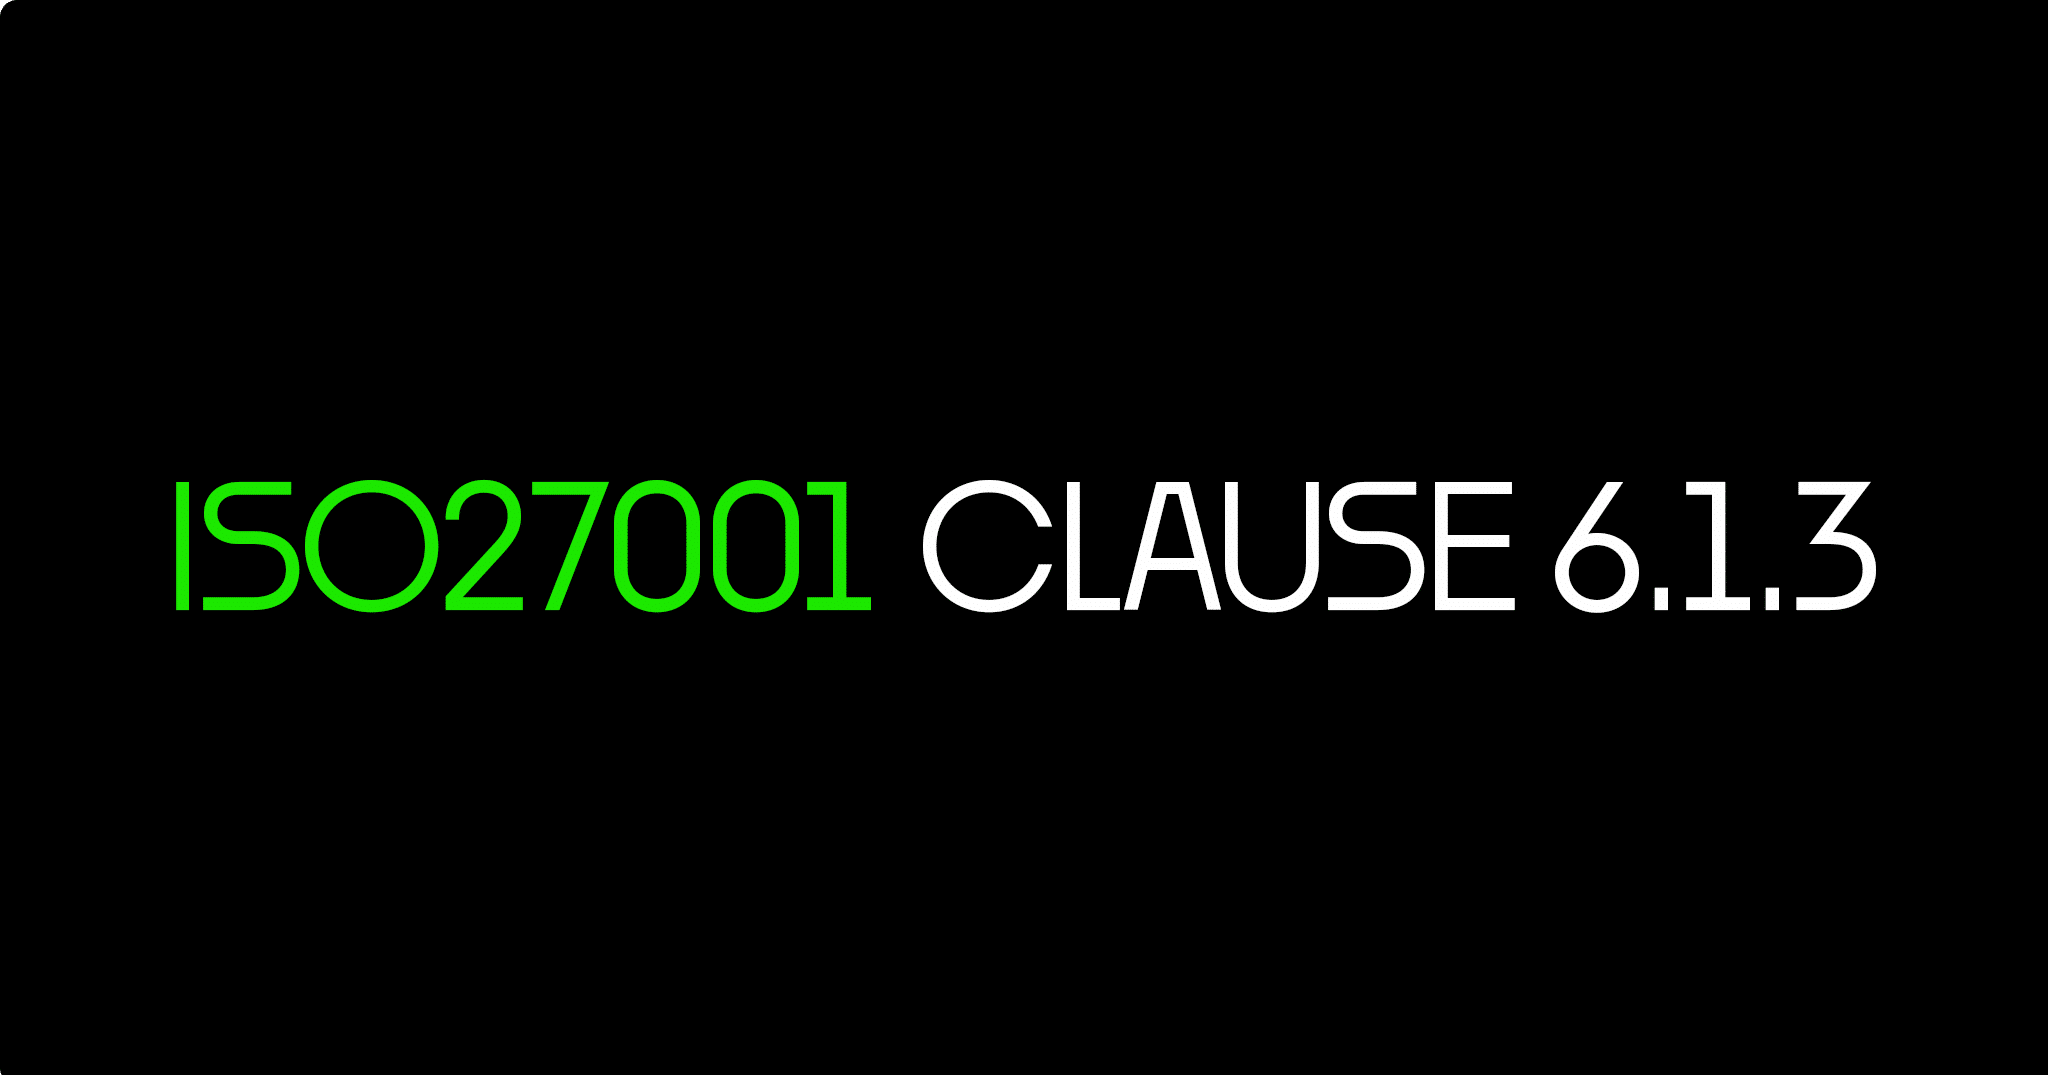 ISO 27001 Clause 6.1.3 Information Security Risk Treatment Certification Guide